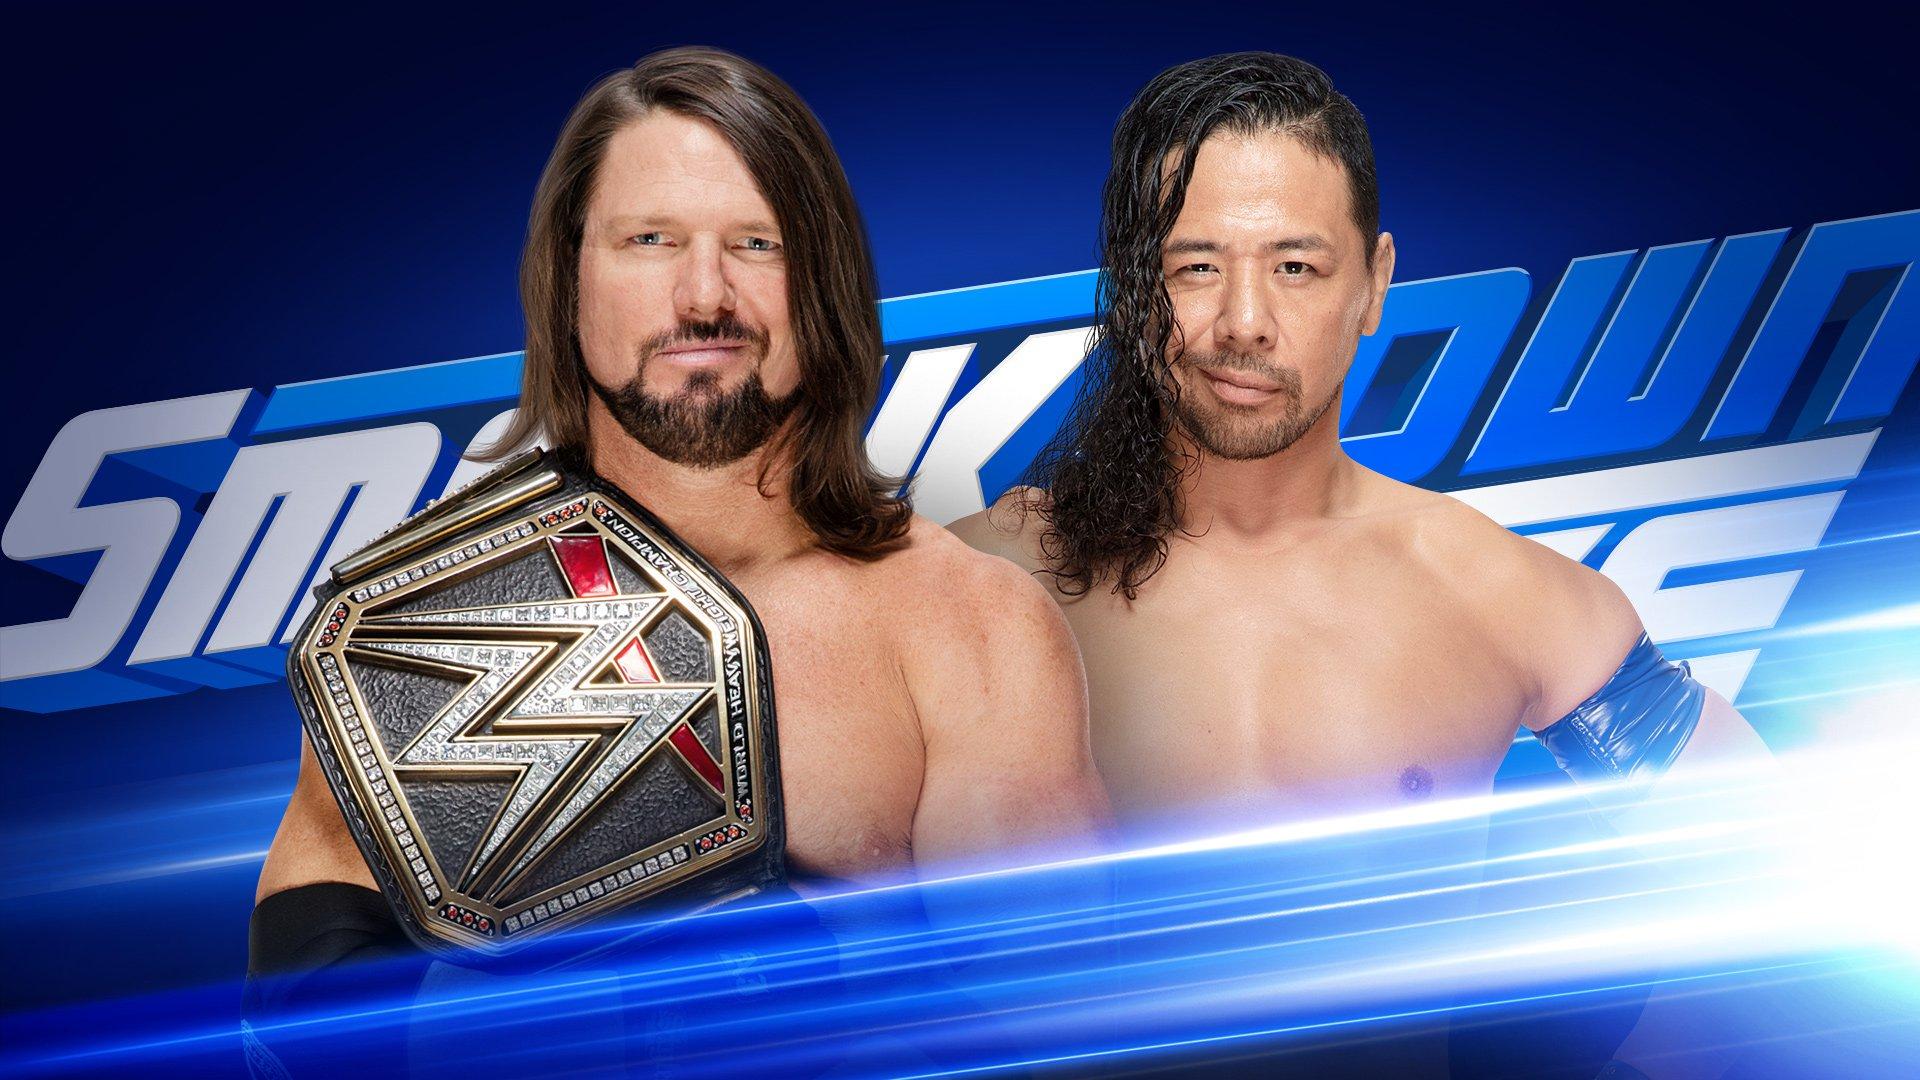 What You Can Expect To See On Tonight's Episode Of SmackDown LIVE From